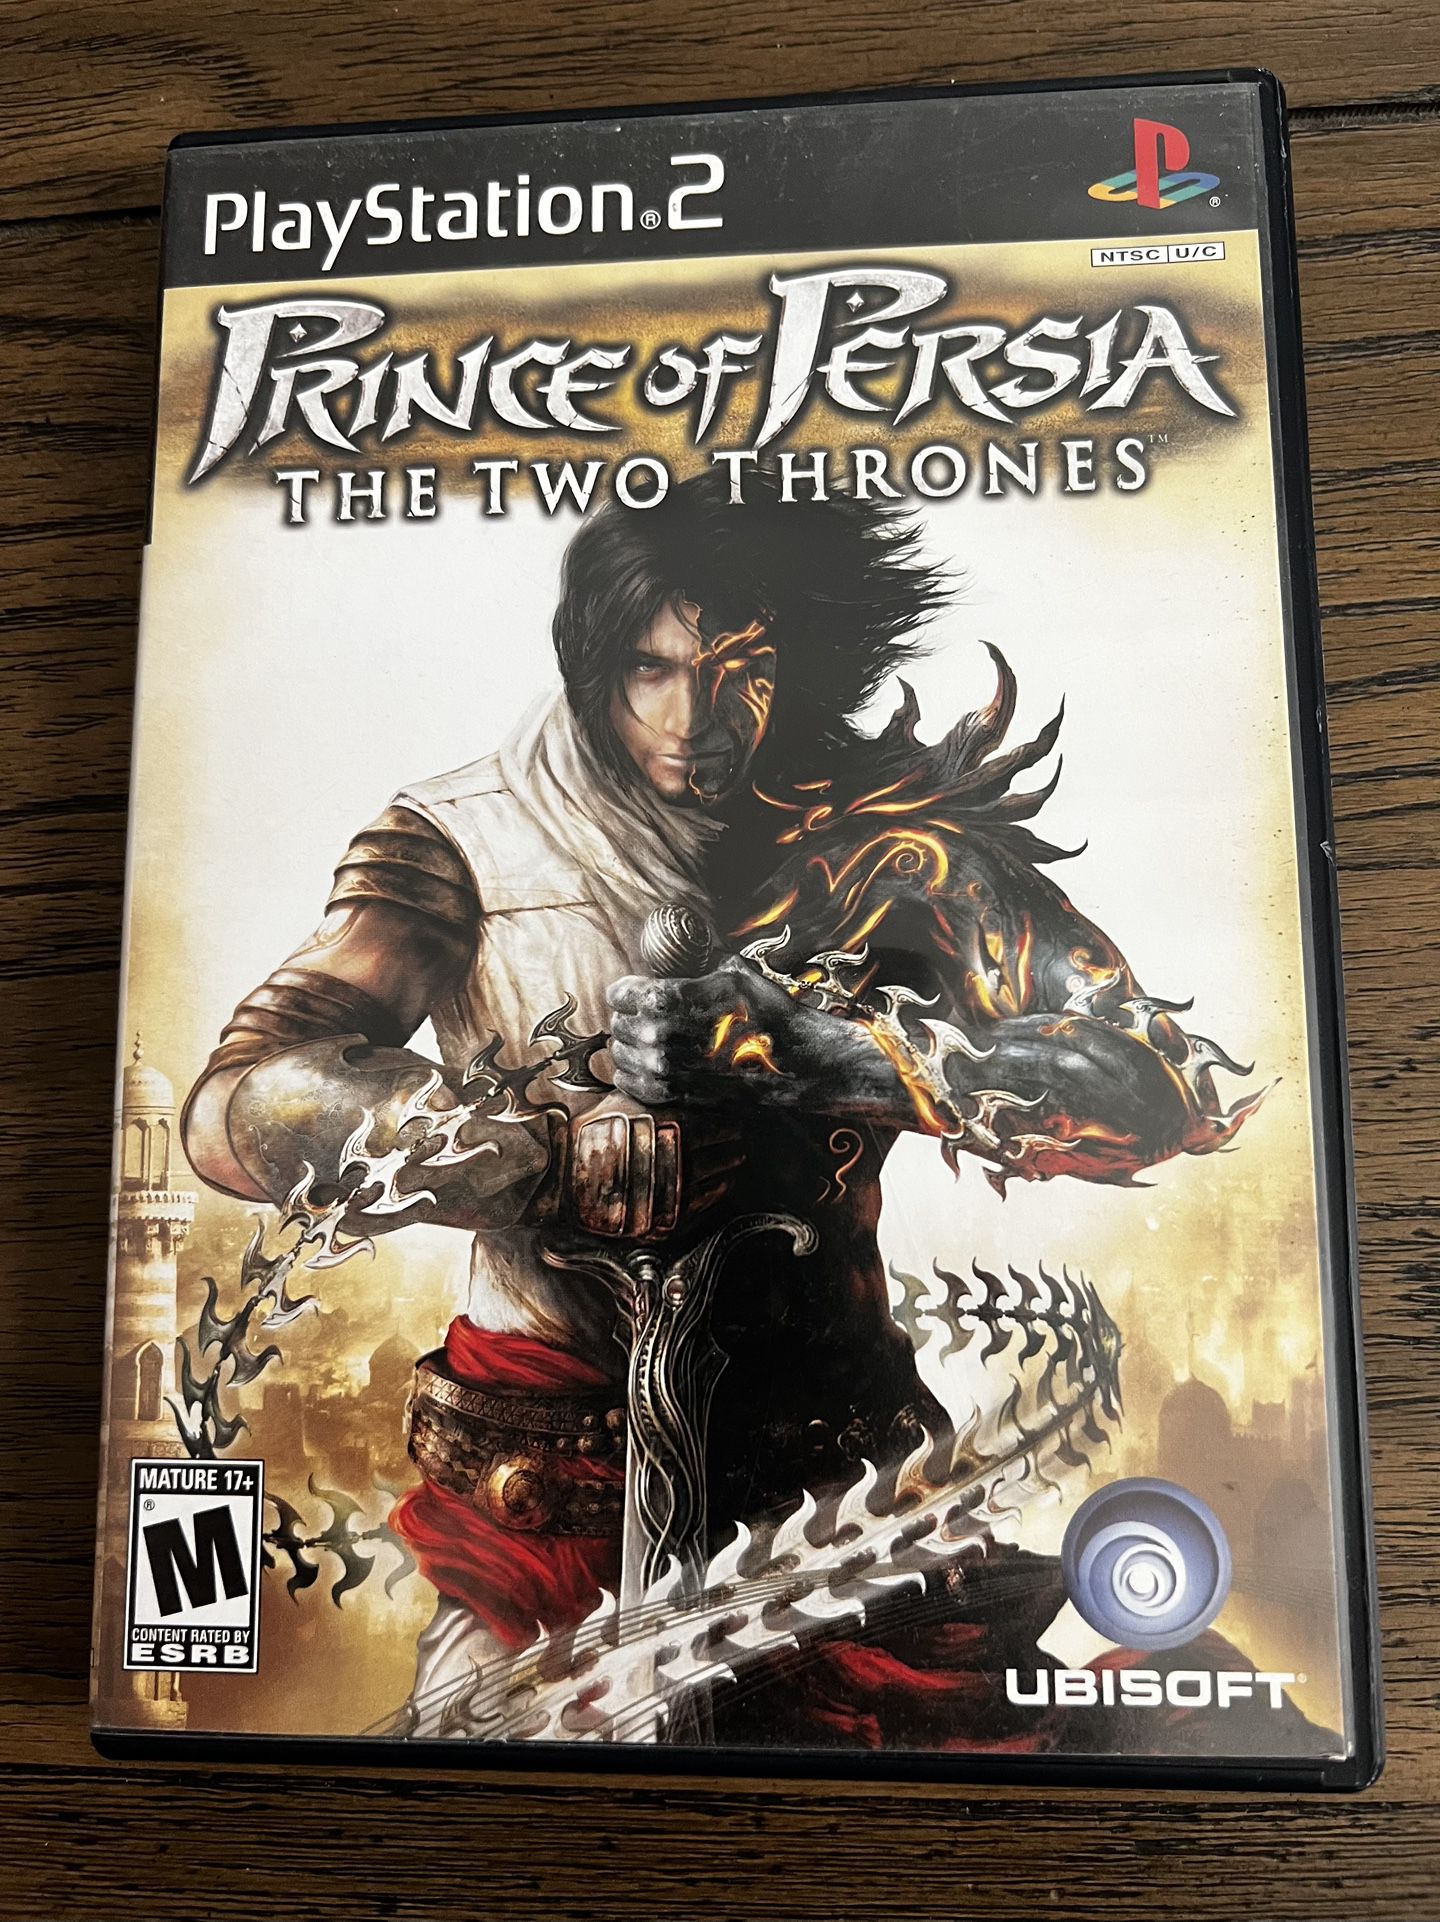 Prince Of Persia PS2 Games, Electronics